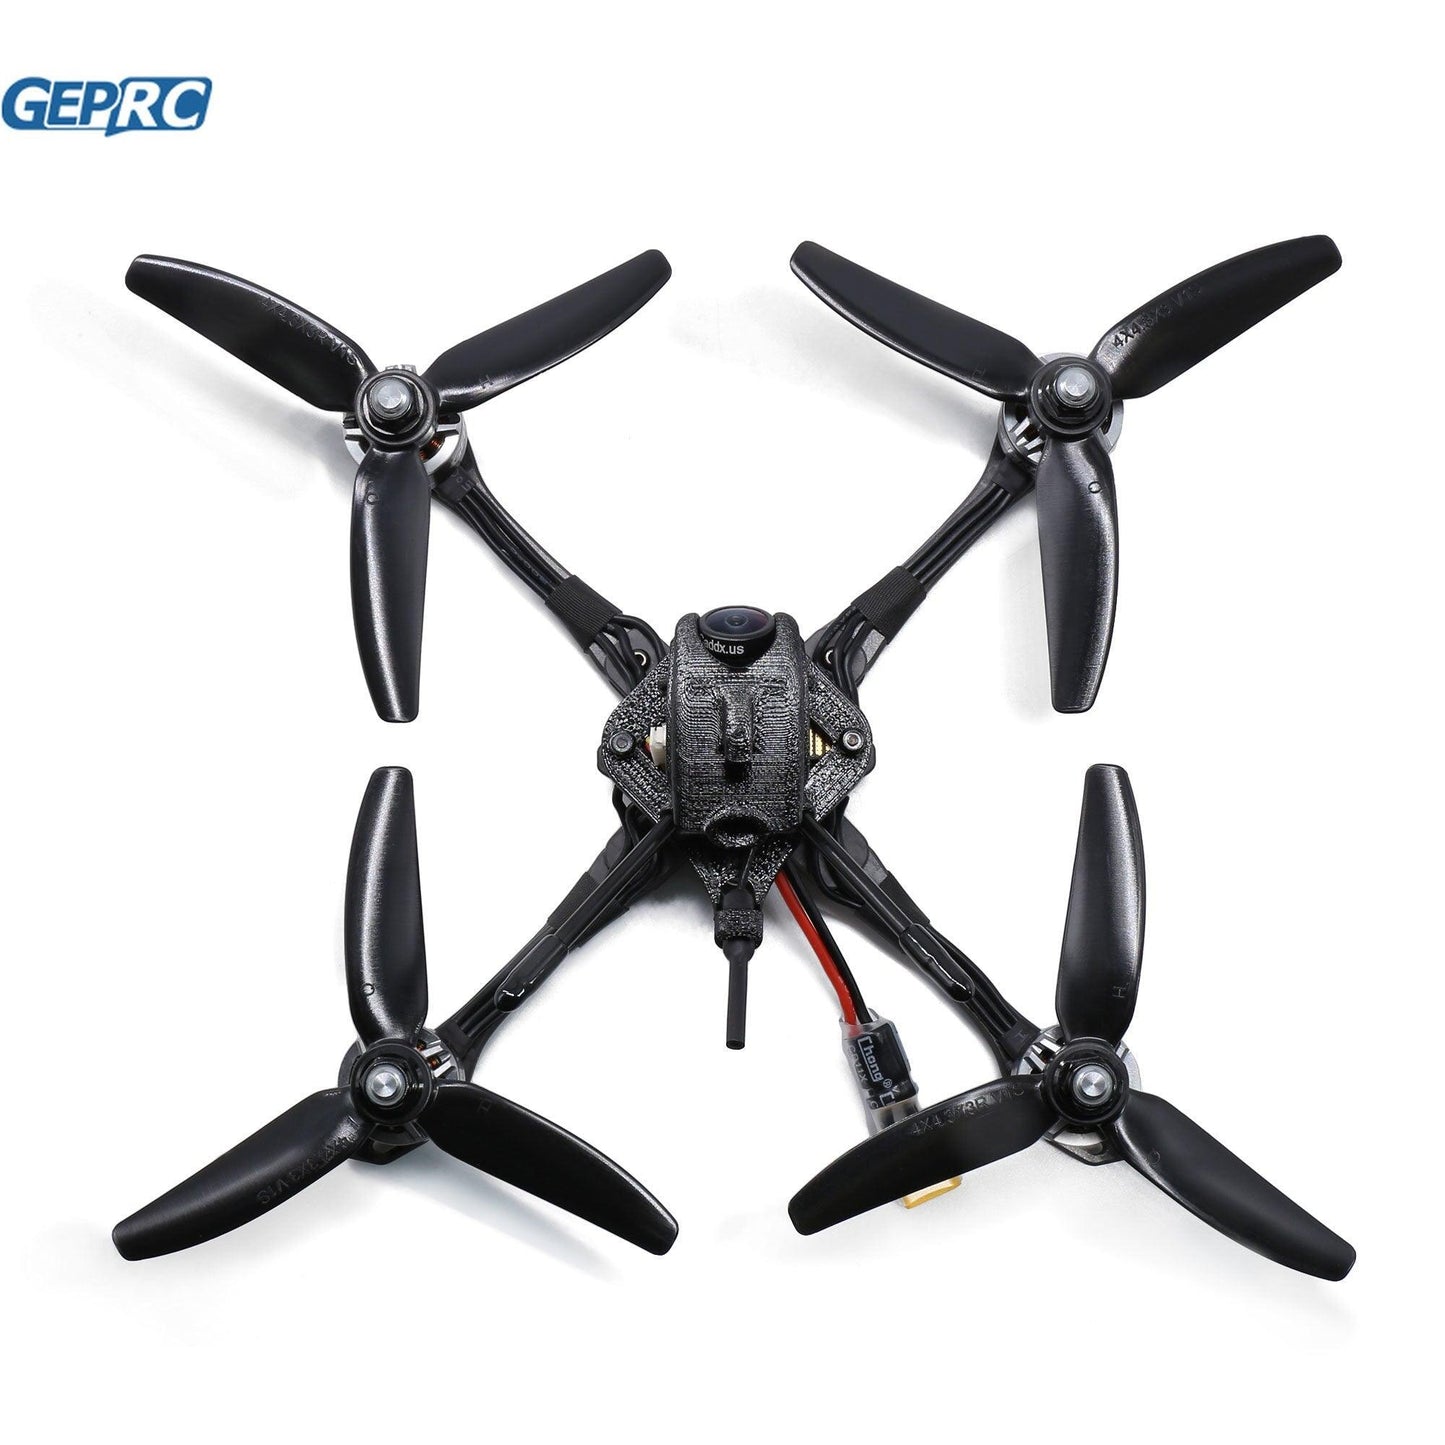 GEPRC Dolphin ToothPick FPV Drone - 4inch New Drone HD Camera Fpv Height Maintain Quadcopter RC Dron Toy Gift - RCDrone